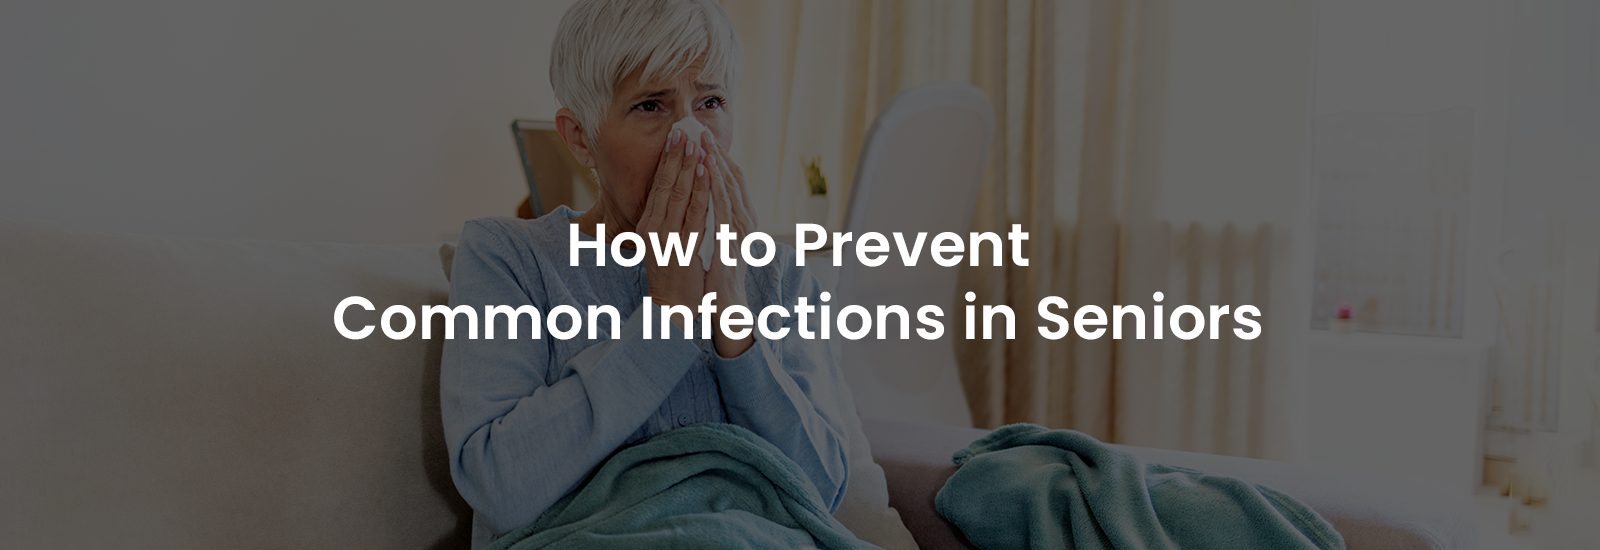 How to Prevent Common Infections in Seniors | Banner Image